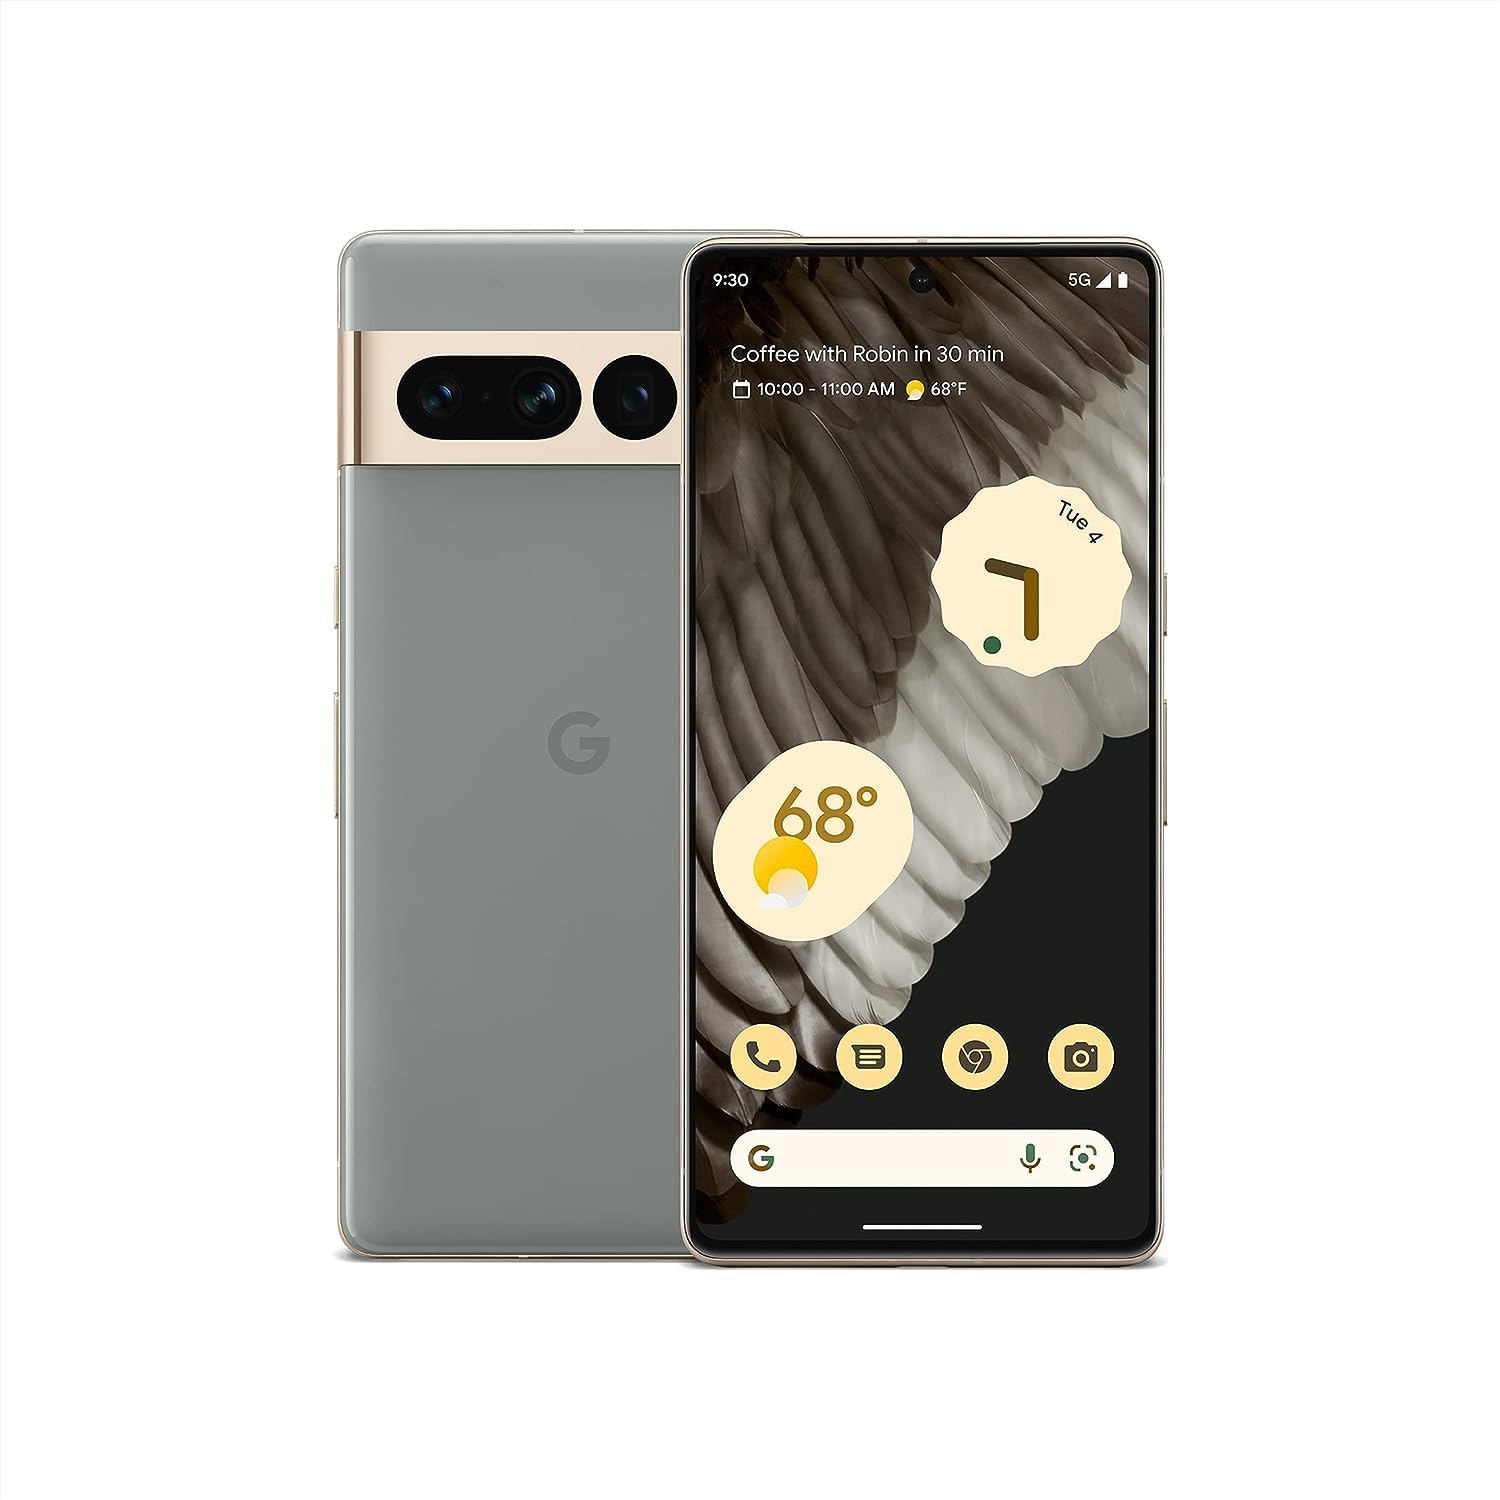 Google Pixel 7 Pro - 5G Android Phone - Unlocked Smartphone with Telephoto , Wide Angle Lens, and 24-Hour Battery - 256GB - Hazel